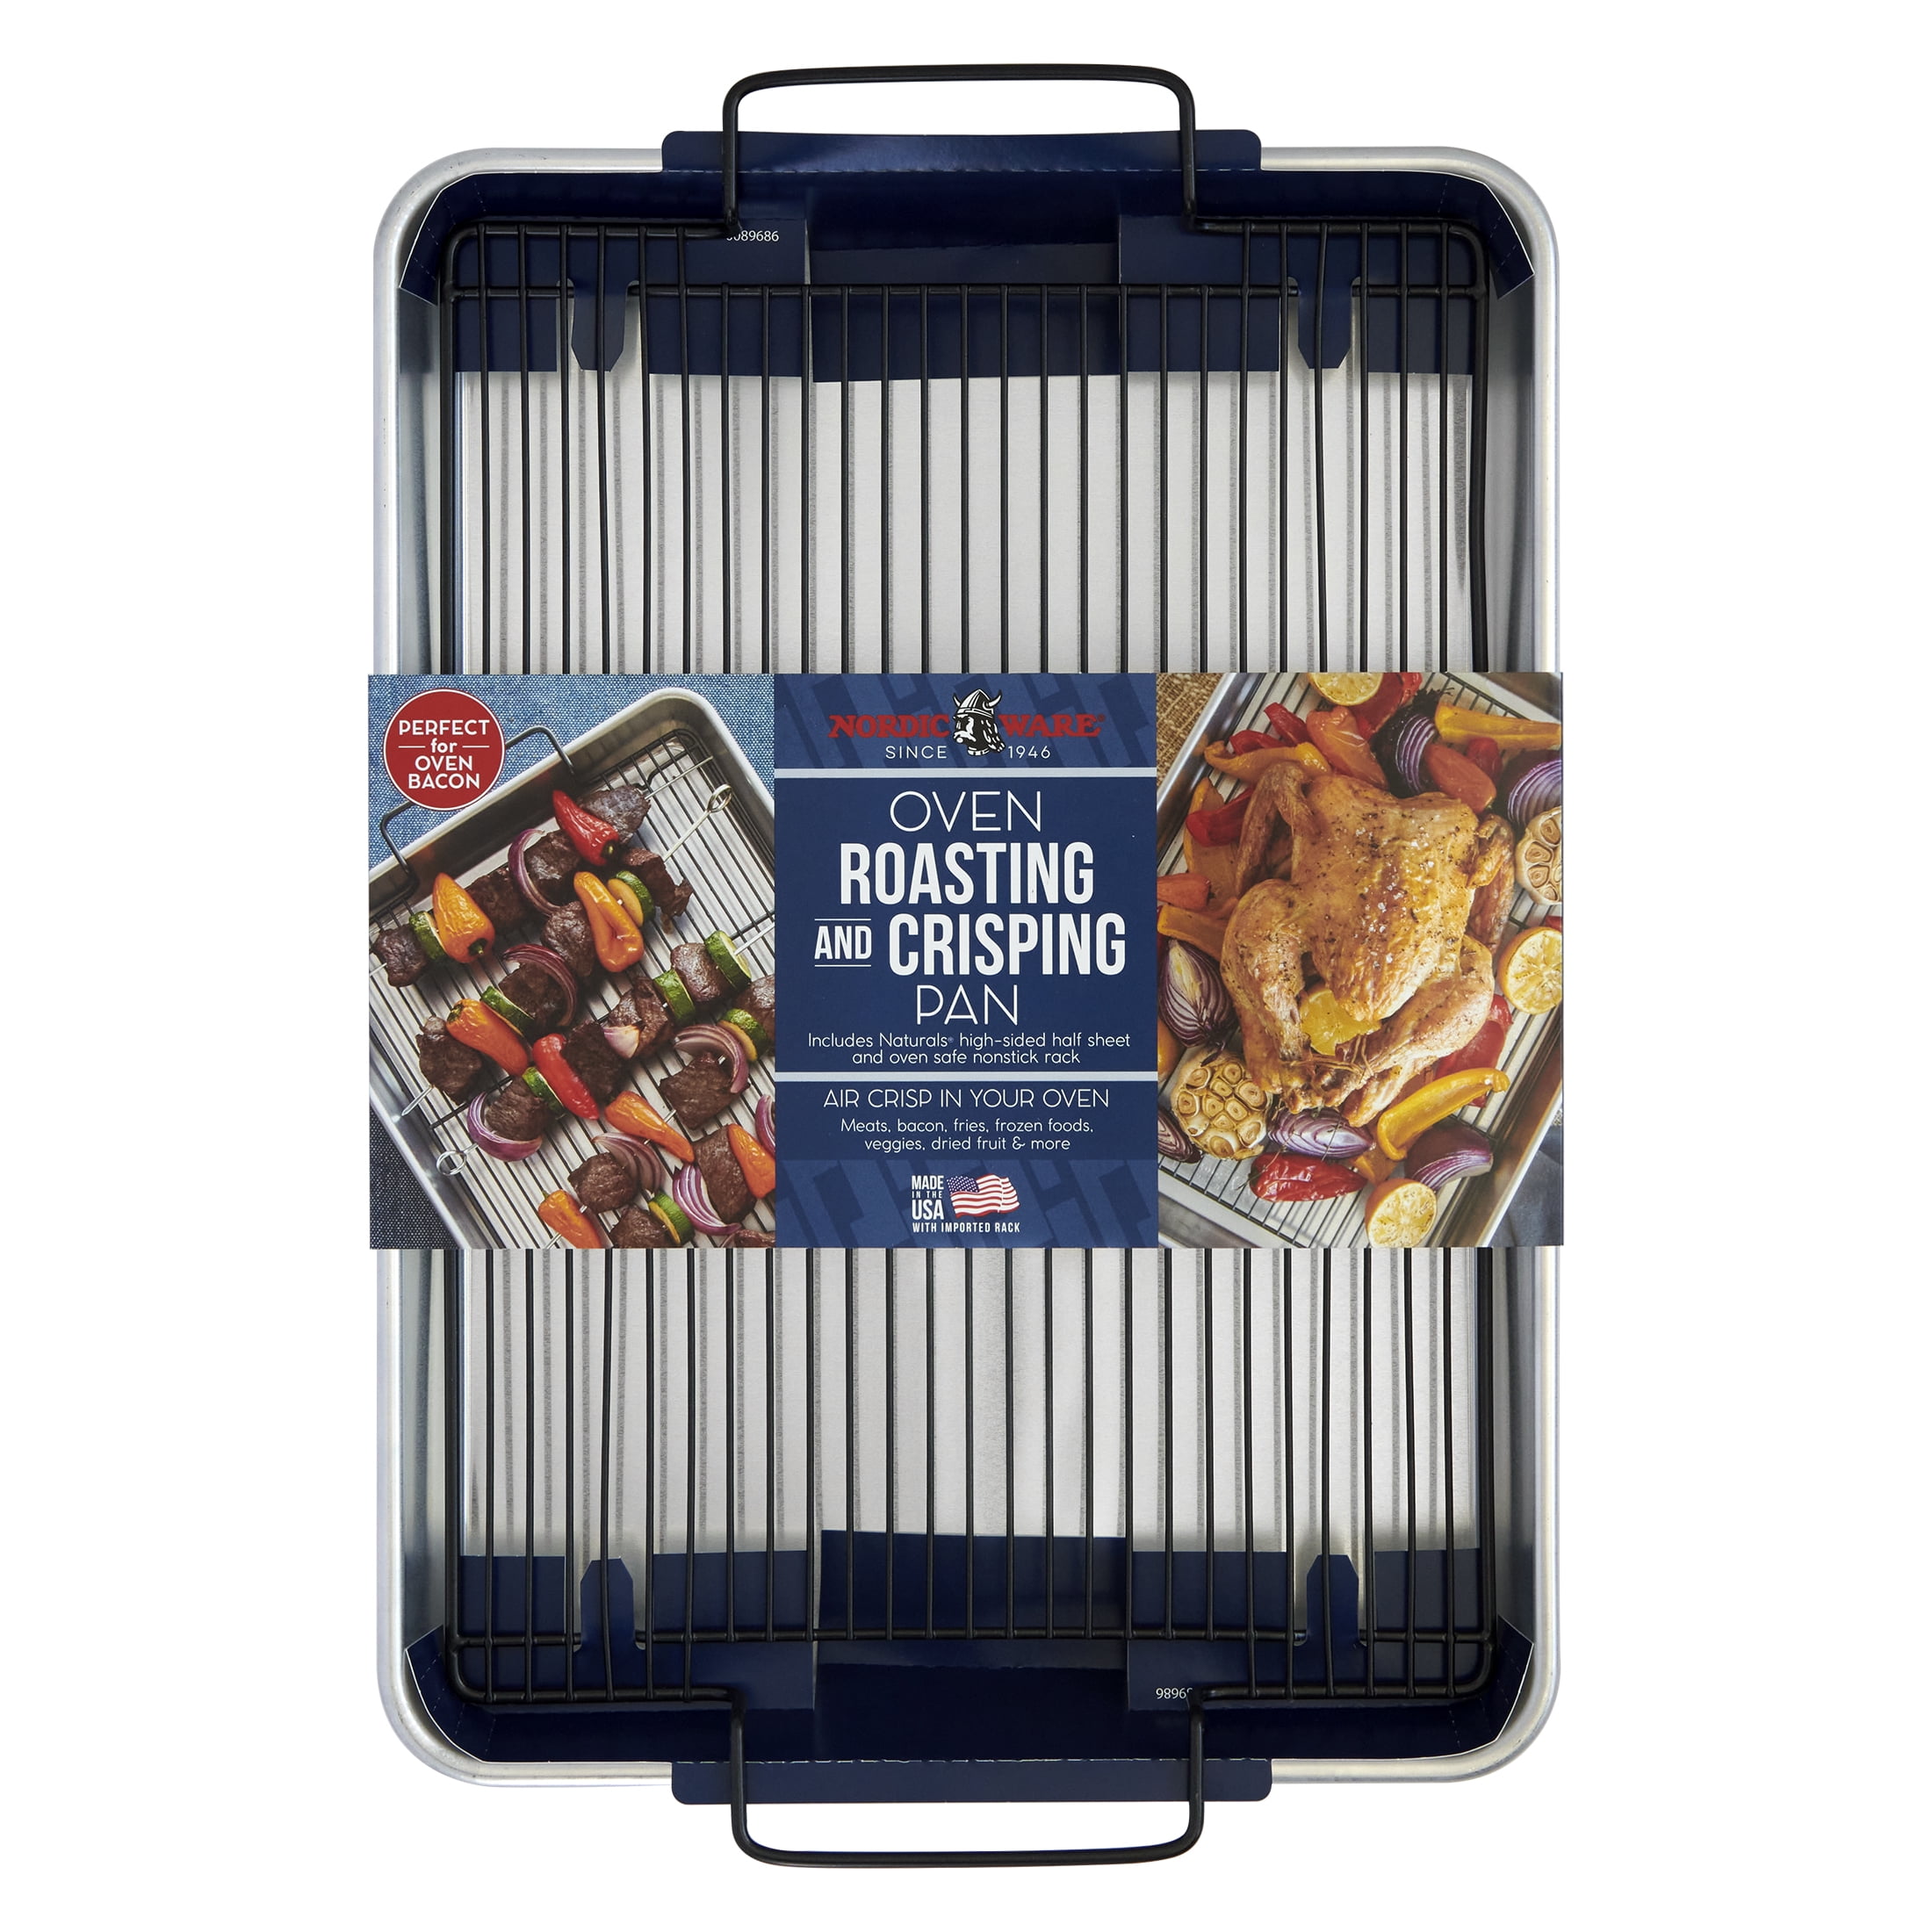 Nordic Ware's Oven Crisp Baking Pans: The best pans for crisping foods in  your oven 